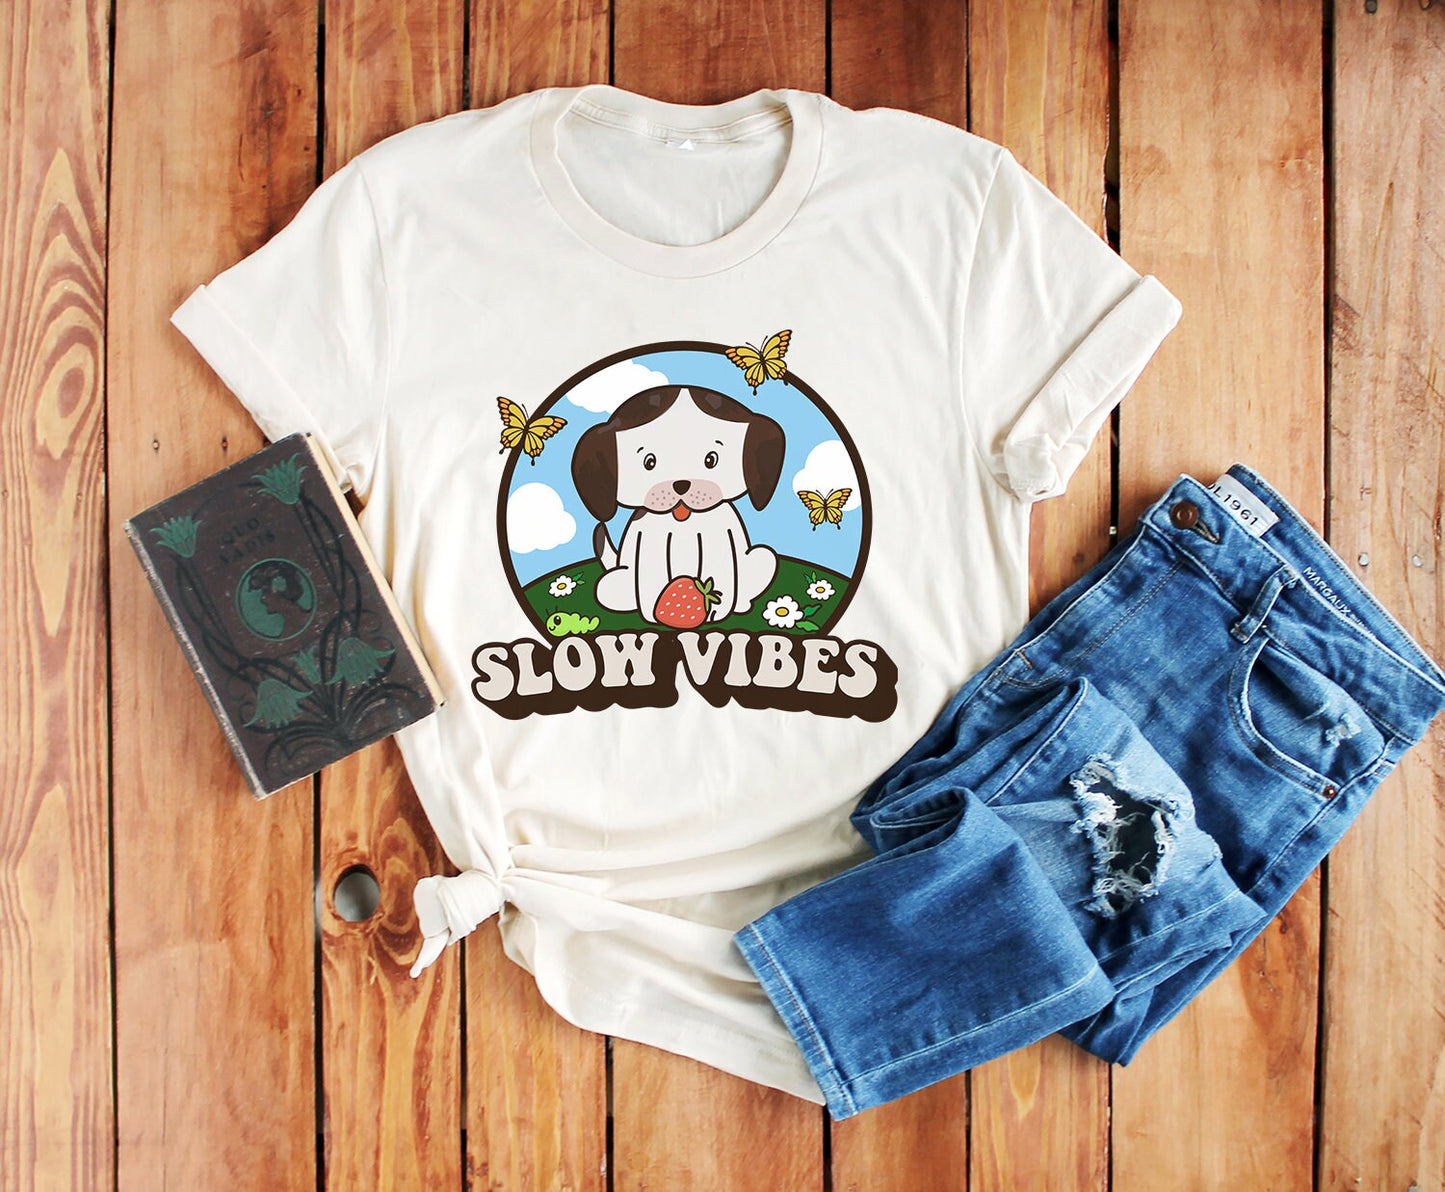 Slow Vibes Pokey and Slow Little Puppy Ultra Soft Graphic Tee Unisex Soft Tee T-shirt for Women or Men